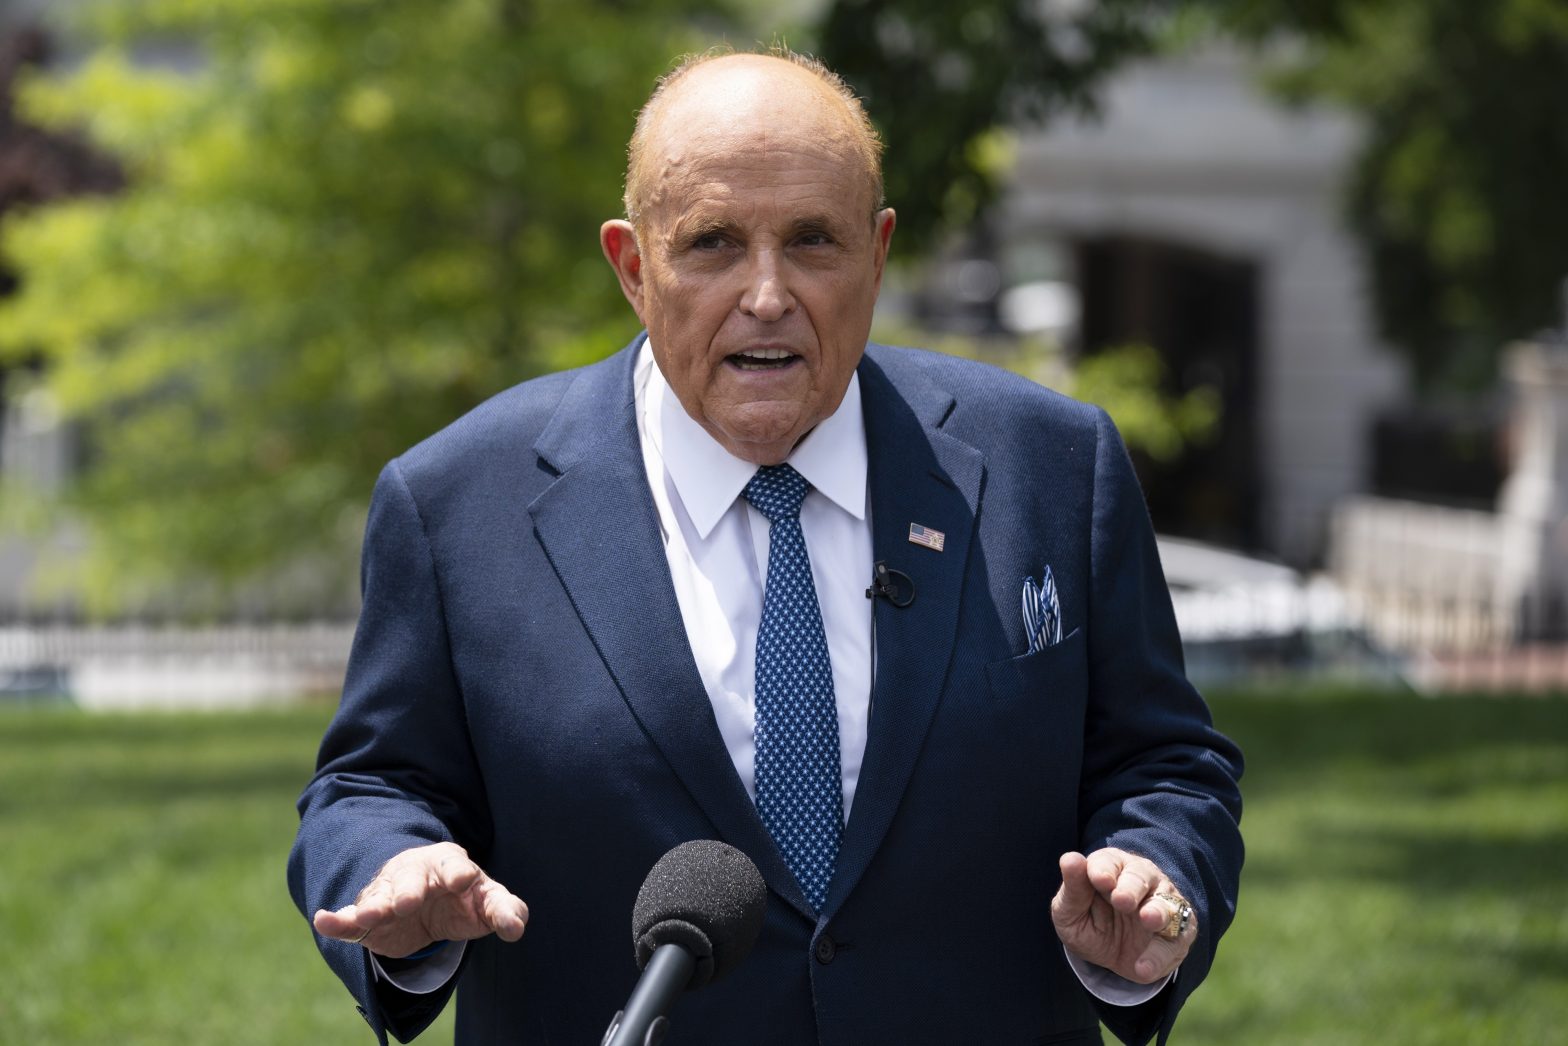 Giuliani Defamation Lawsuit Shows Challenges Faced by Poll Workers